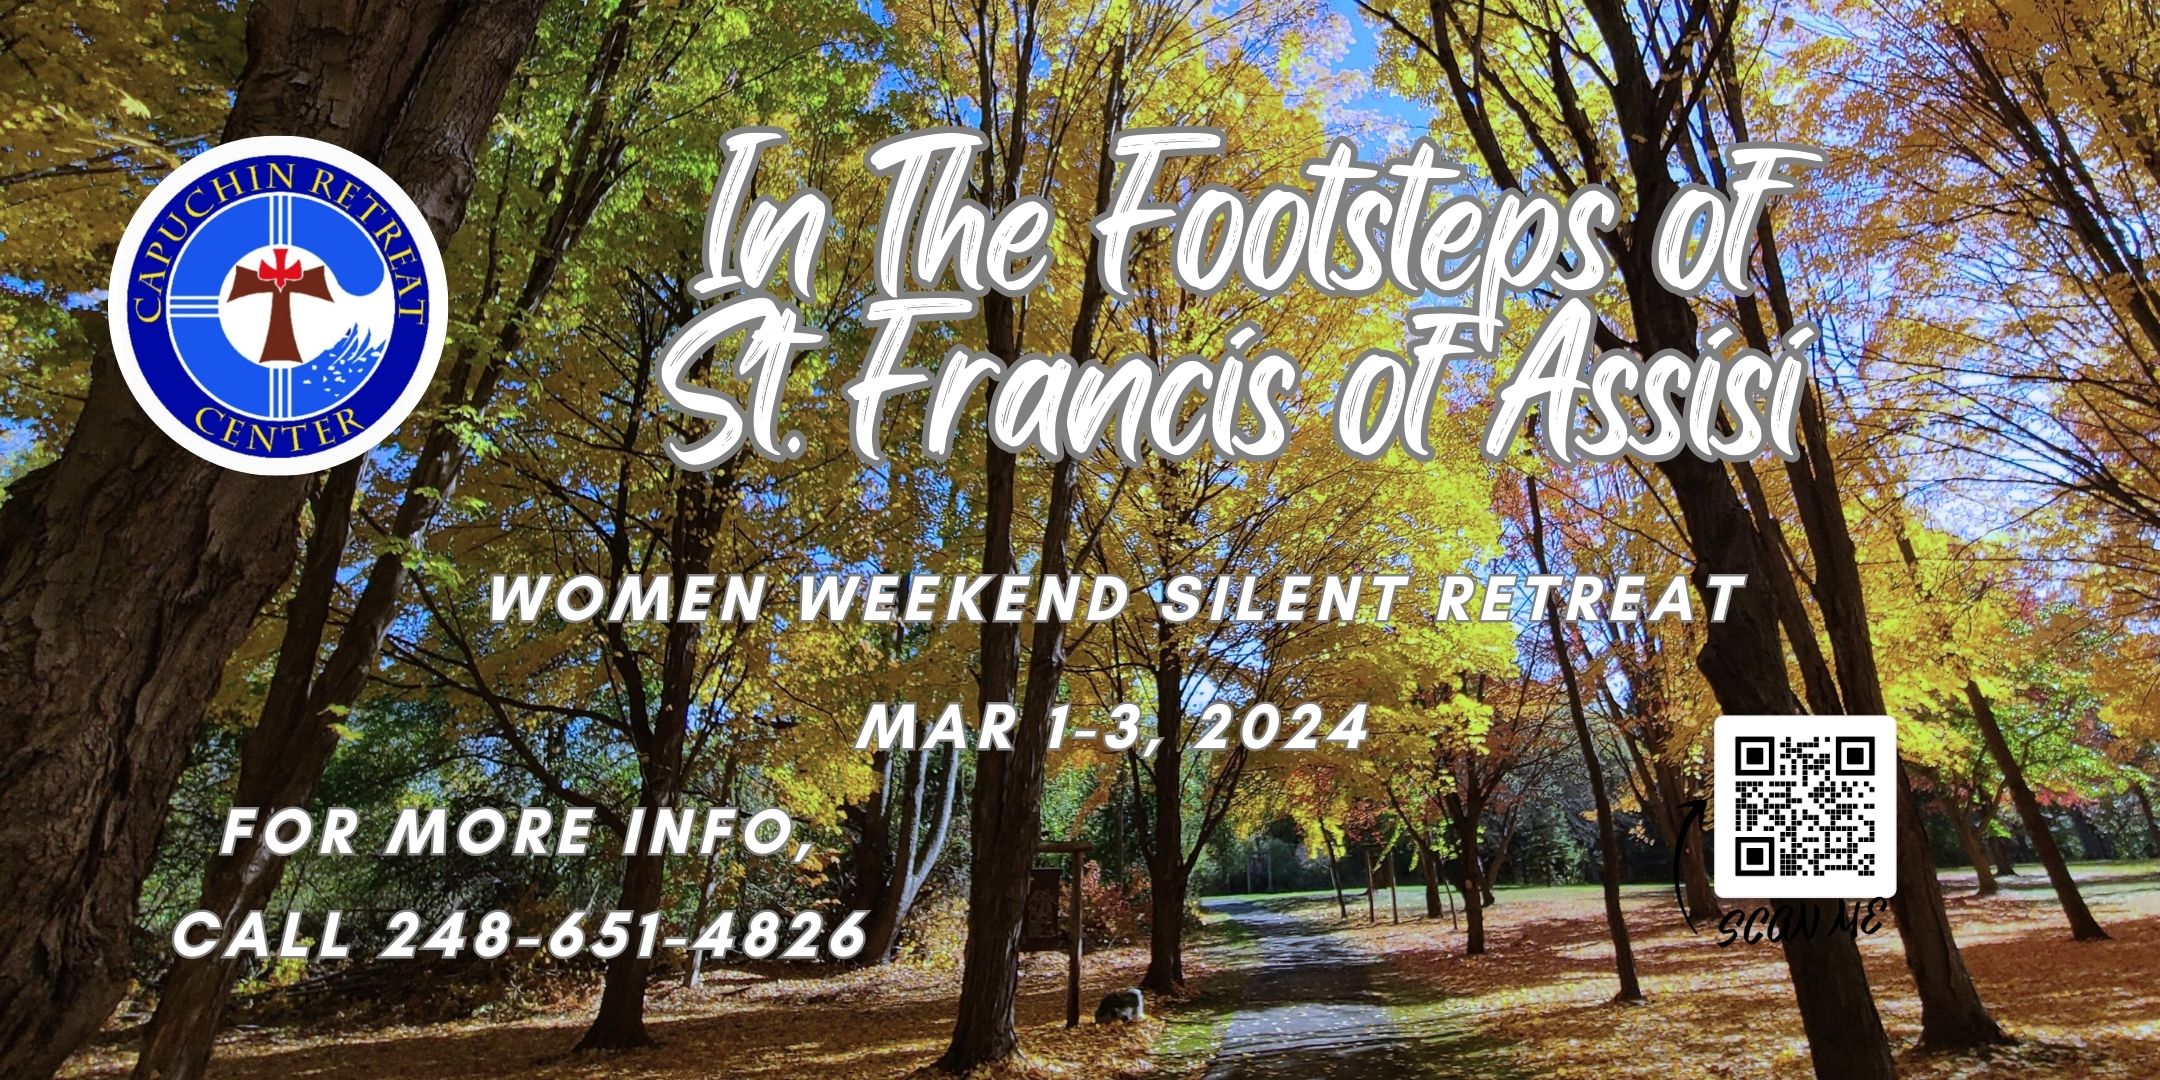 Women’s Silent Retreat Weekend: In the Footsteps of St. Francis of Assisi”